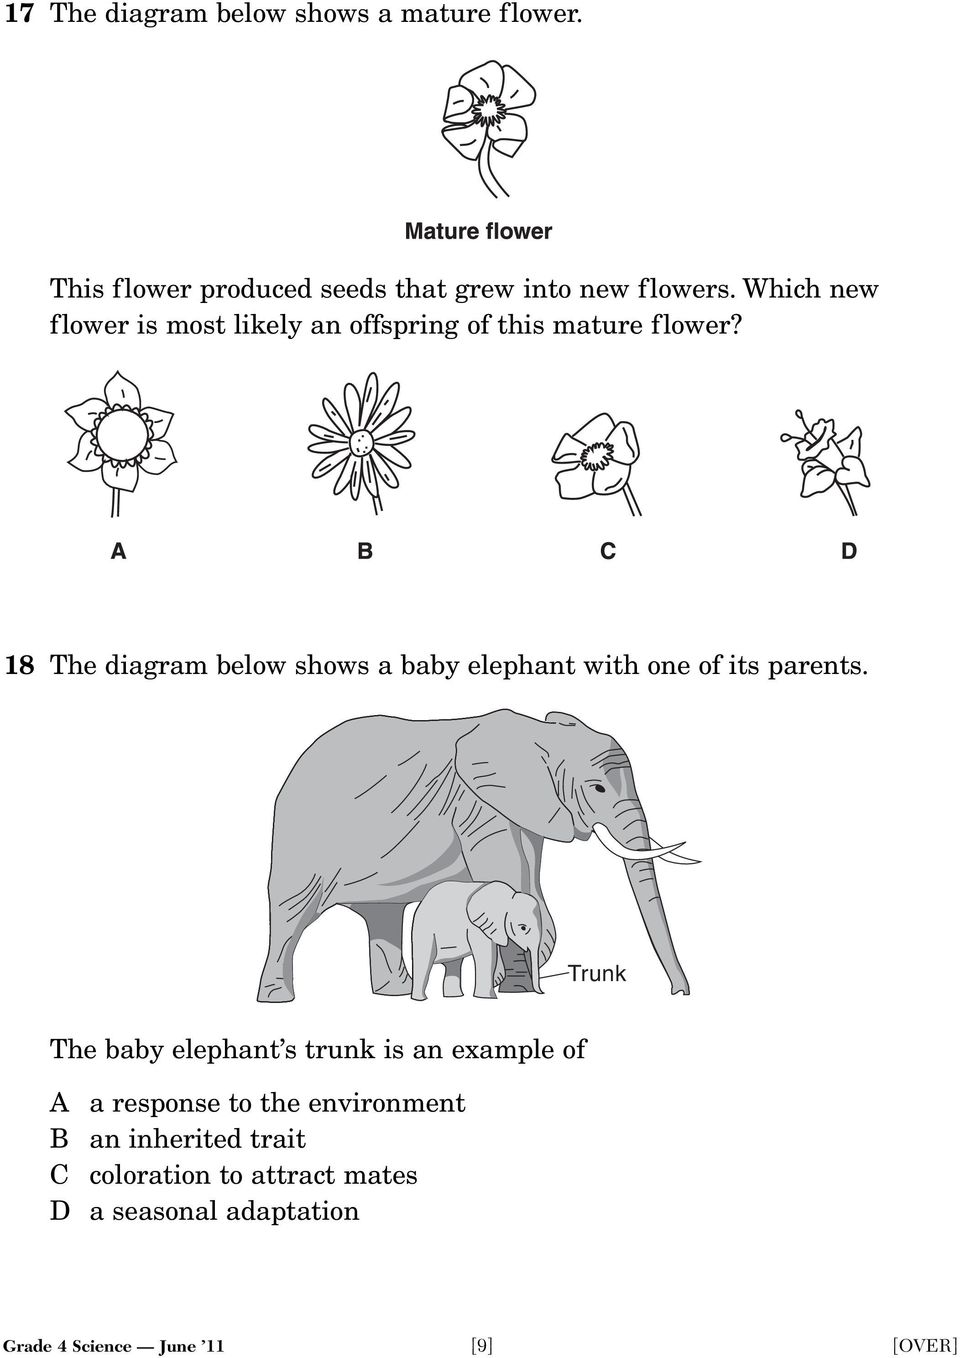 18 The diagram below shows a baby elephant with one of its parents.